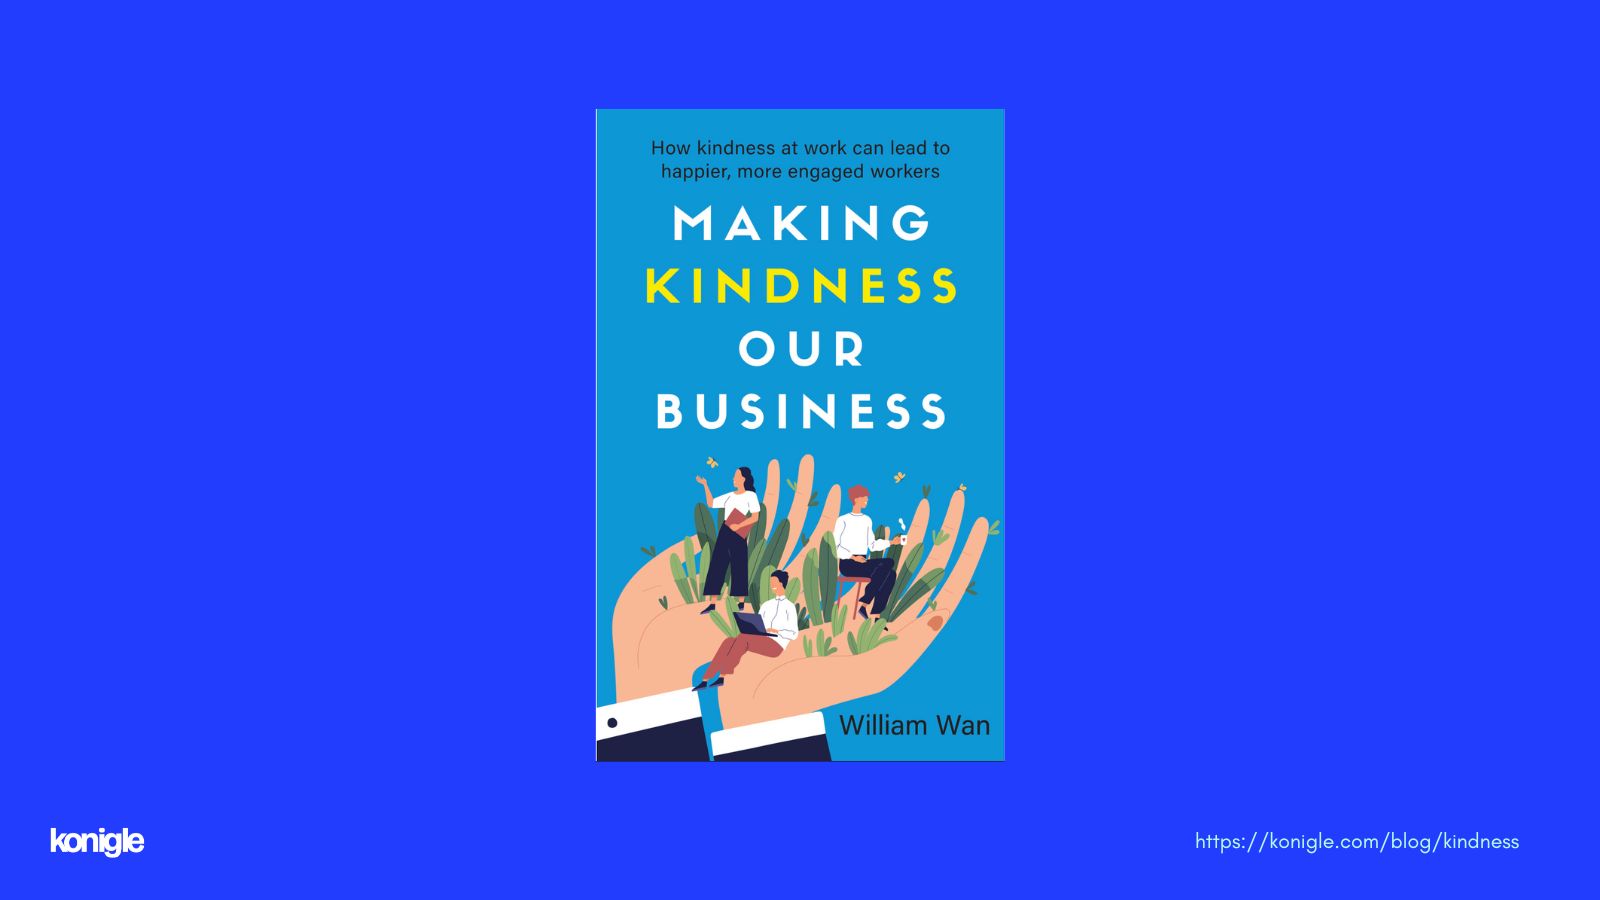 Making Kindness Our Business, a book by William Wan available on kindle and print.